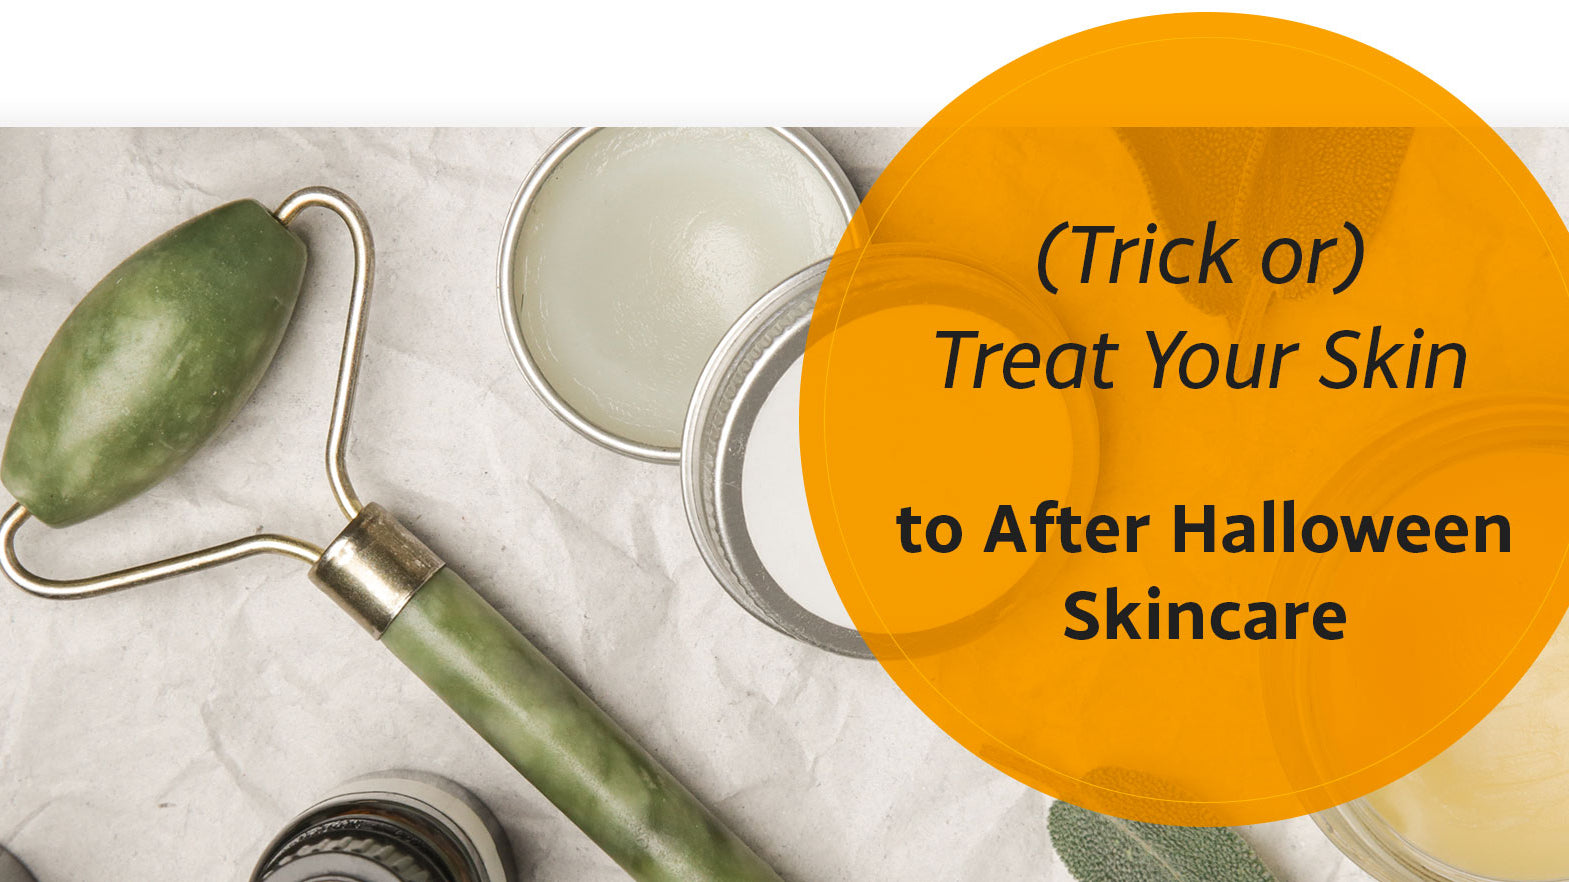 (Trick or) Treat Your Skin to After Halloween Skin Care